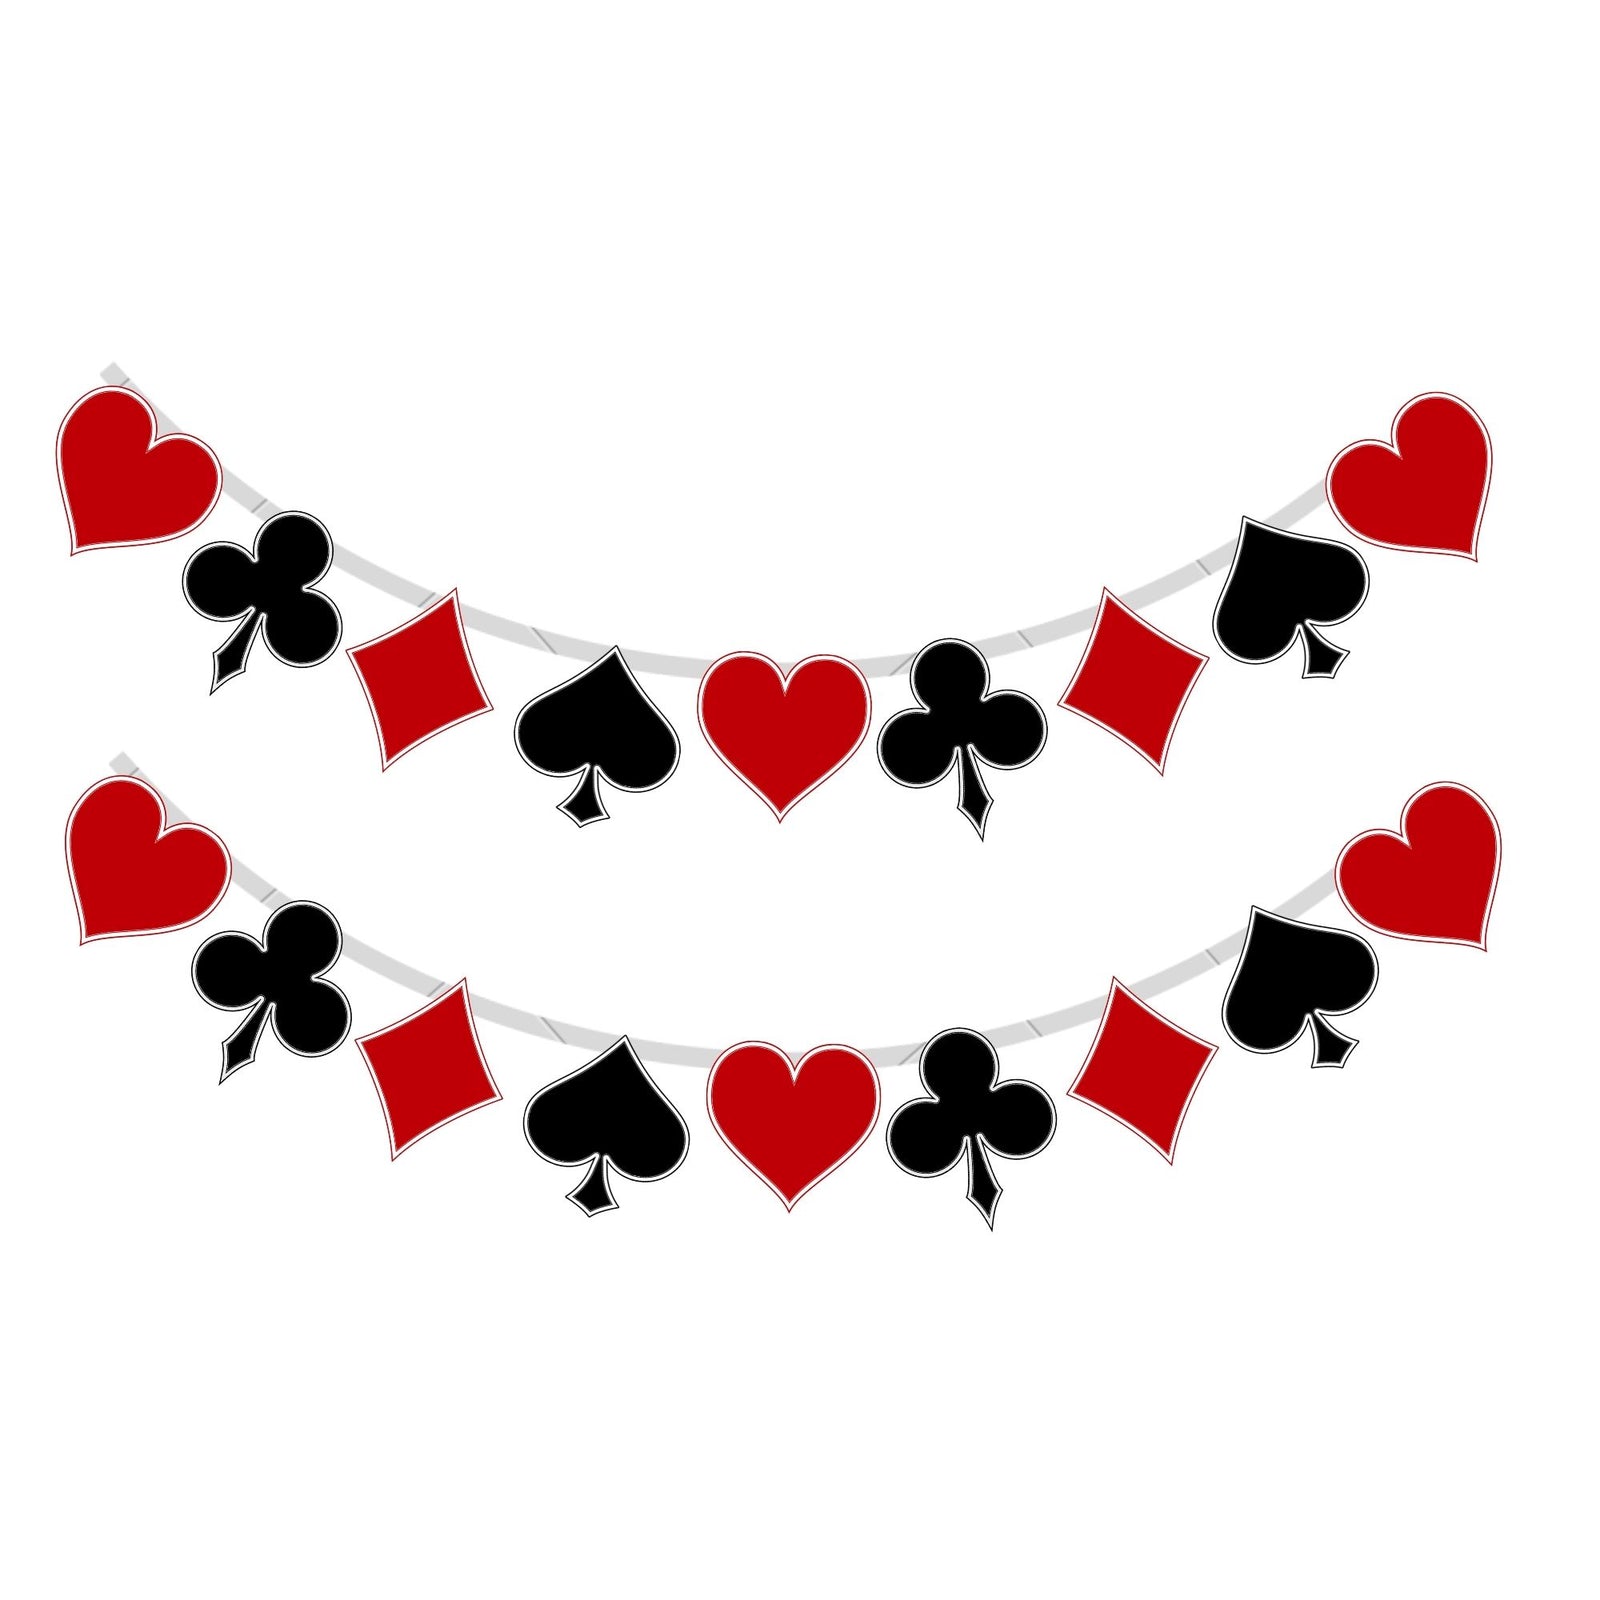 Casino/Card Party Banner (Material:Card Stock / 18 Cards / 2 Metre / Red,Black)